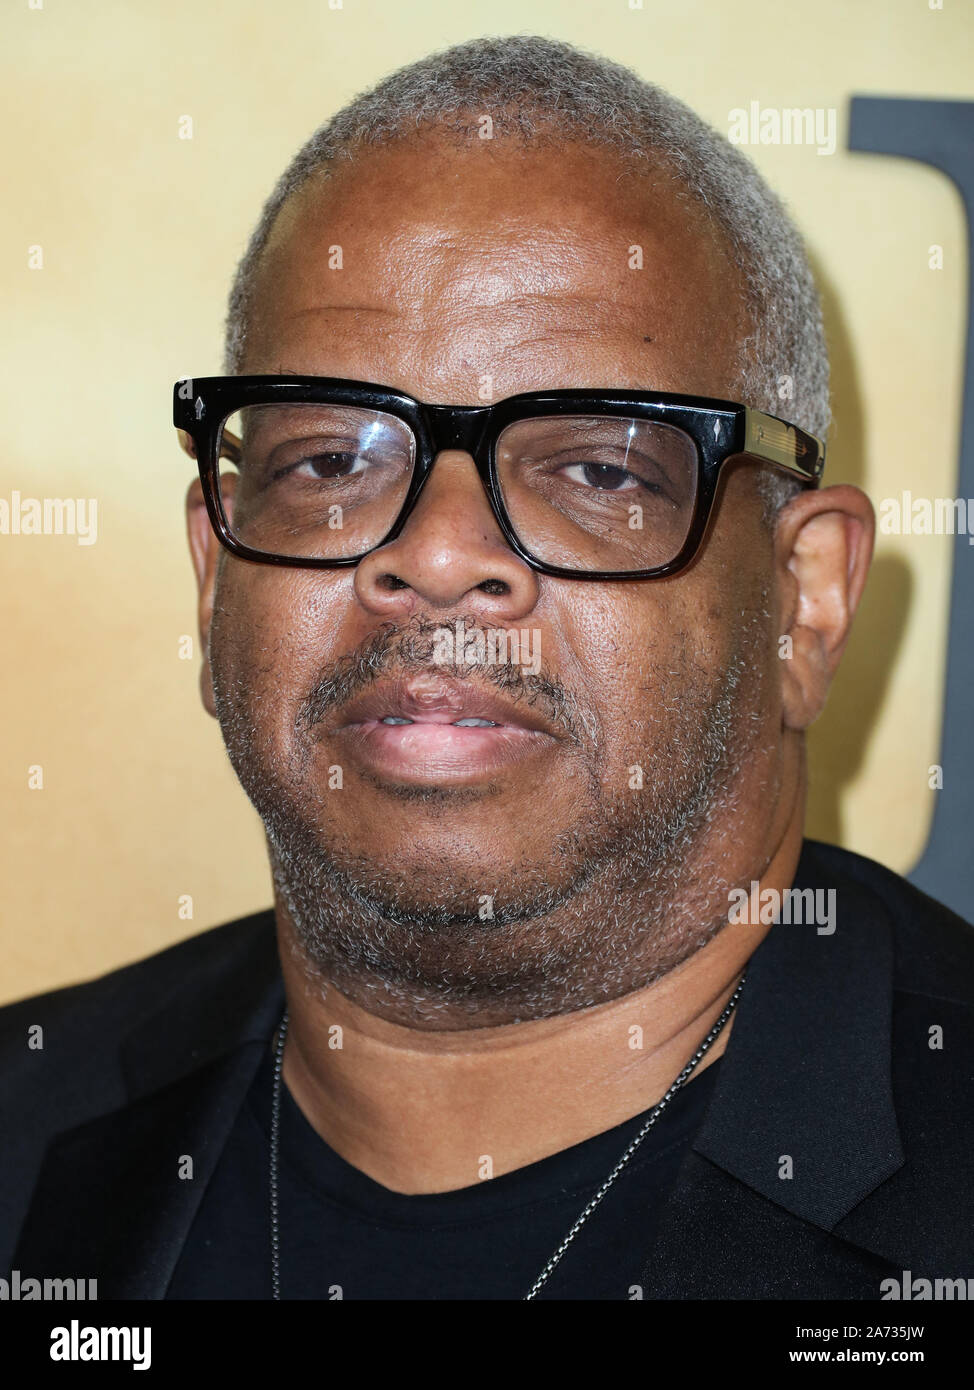 Los Angeles, United States. 29th Oct, 2019. LOS ANGELES, CALIFORNIA, USA - OCTOBER 29: Terence Blanchard arrives at the Los Angeles Premiere Of Focus Features' 'Harriet' held at The Orpheum Theatre on October 29, 2019 in Los Angeles, California, United States. (Photo by Xavier Collin/Image Press Agency) Credit: Image Press Agency/Alamy Live News Stock Photo